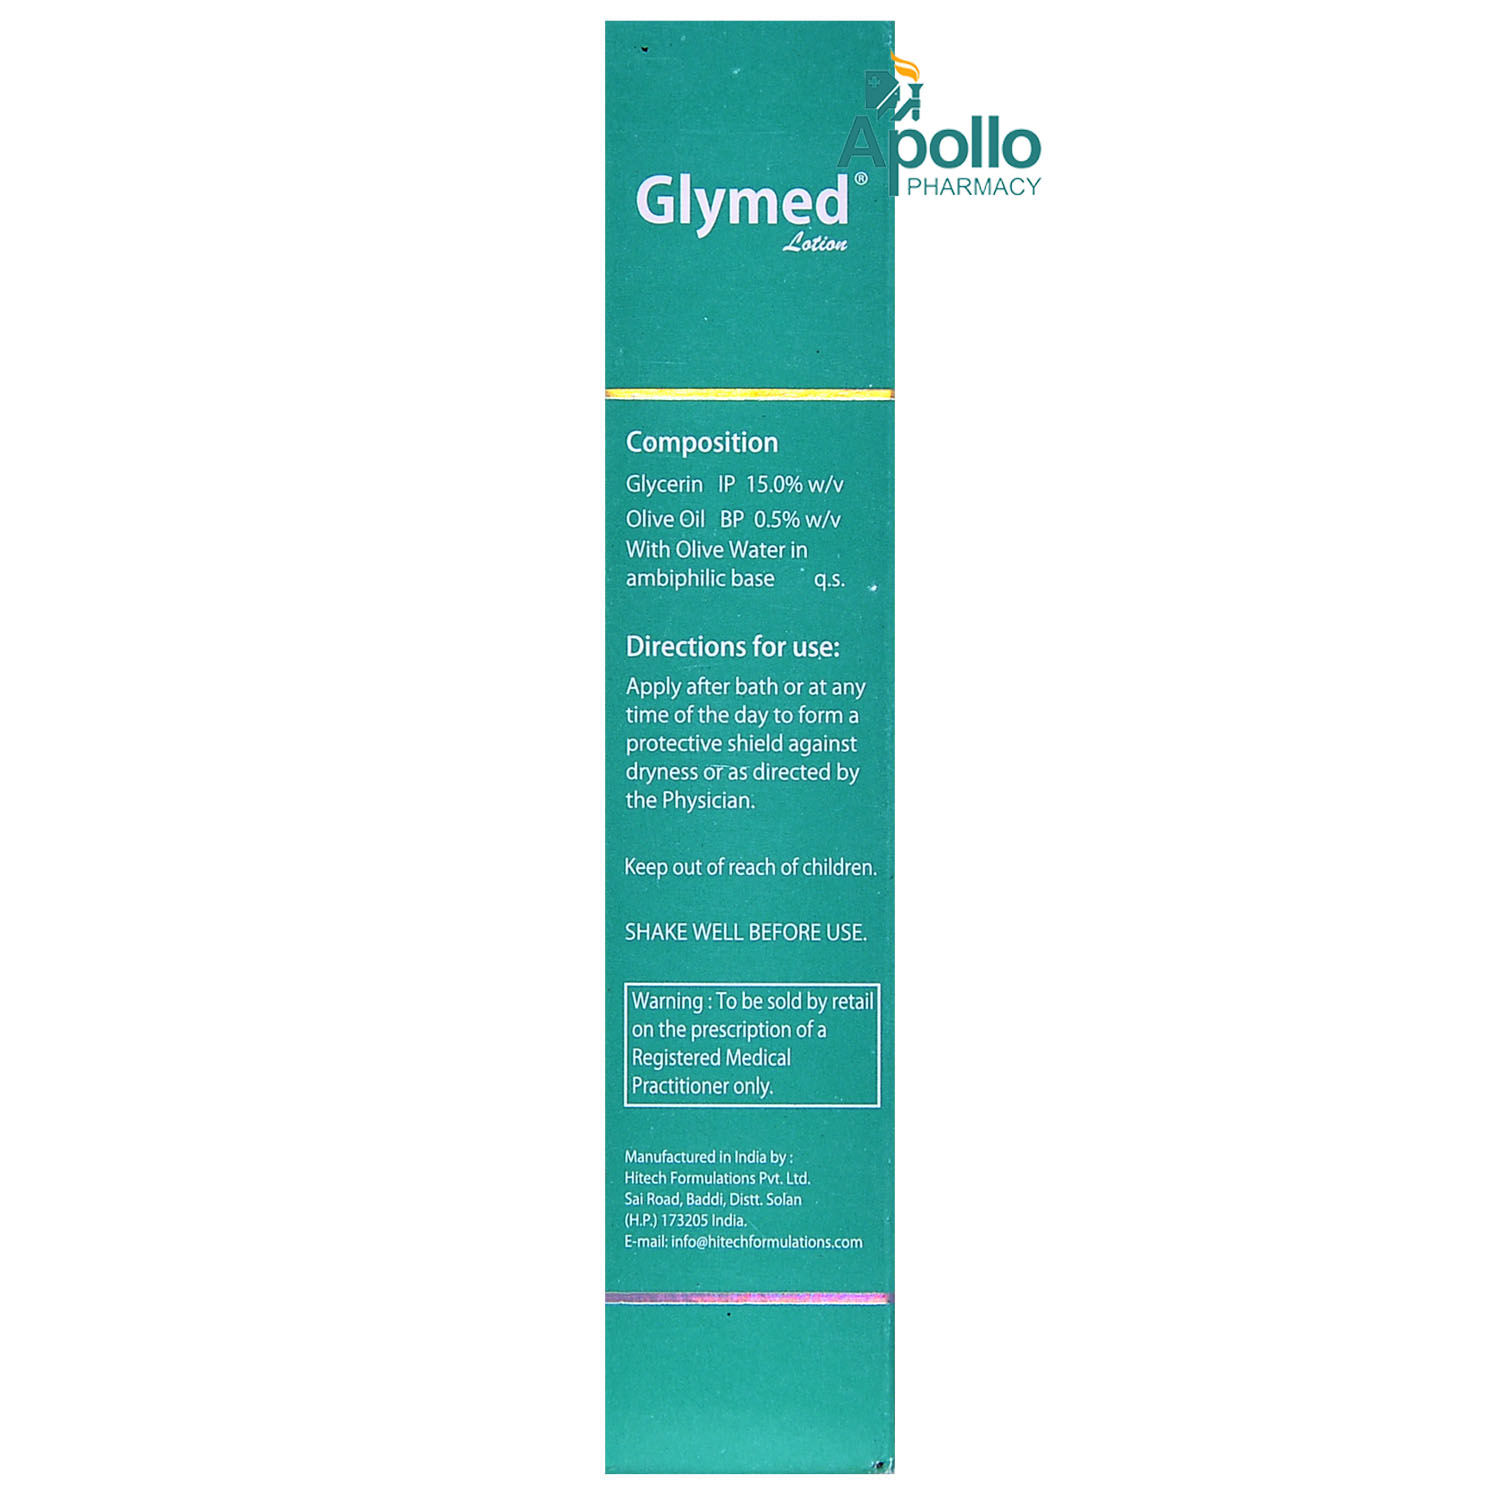 Glymed Lotion 100 ml Price, Uses, Side Effects, Composition Apollo